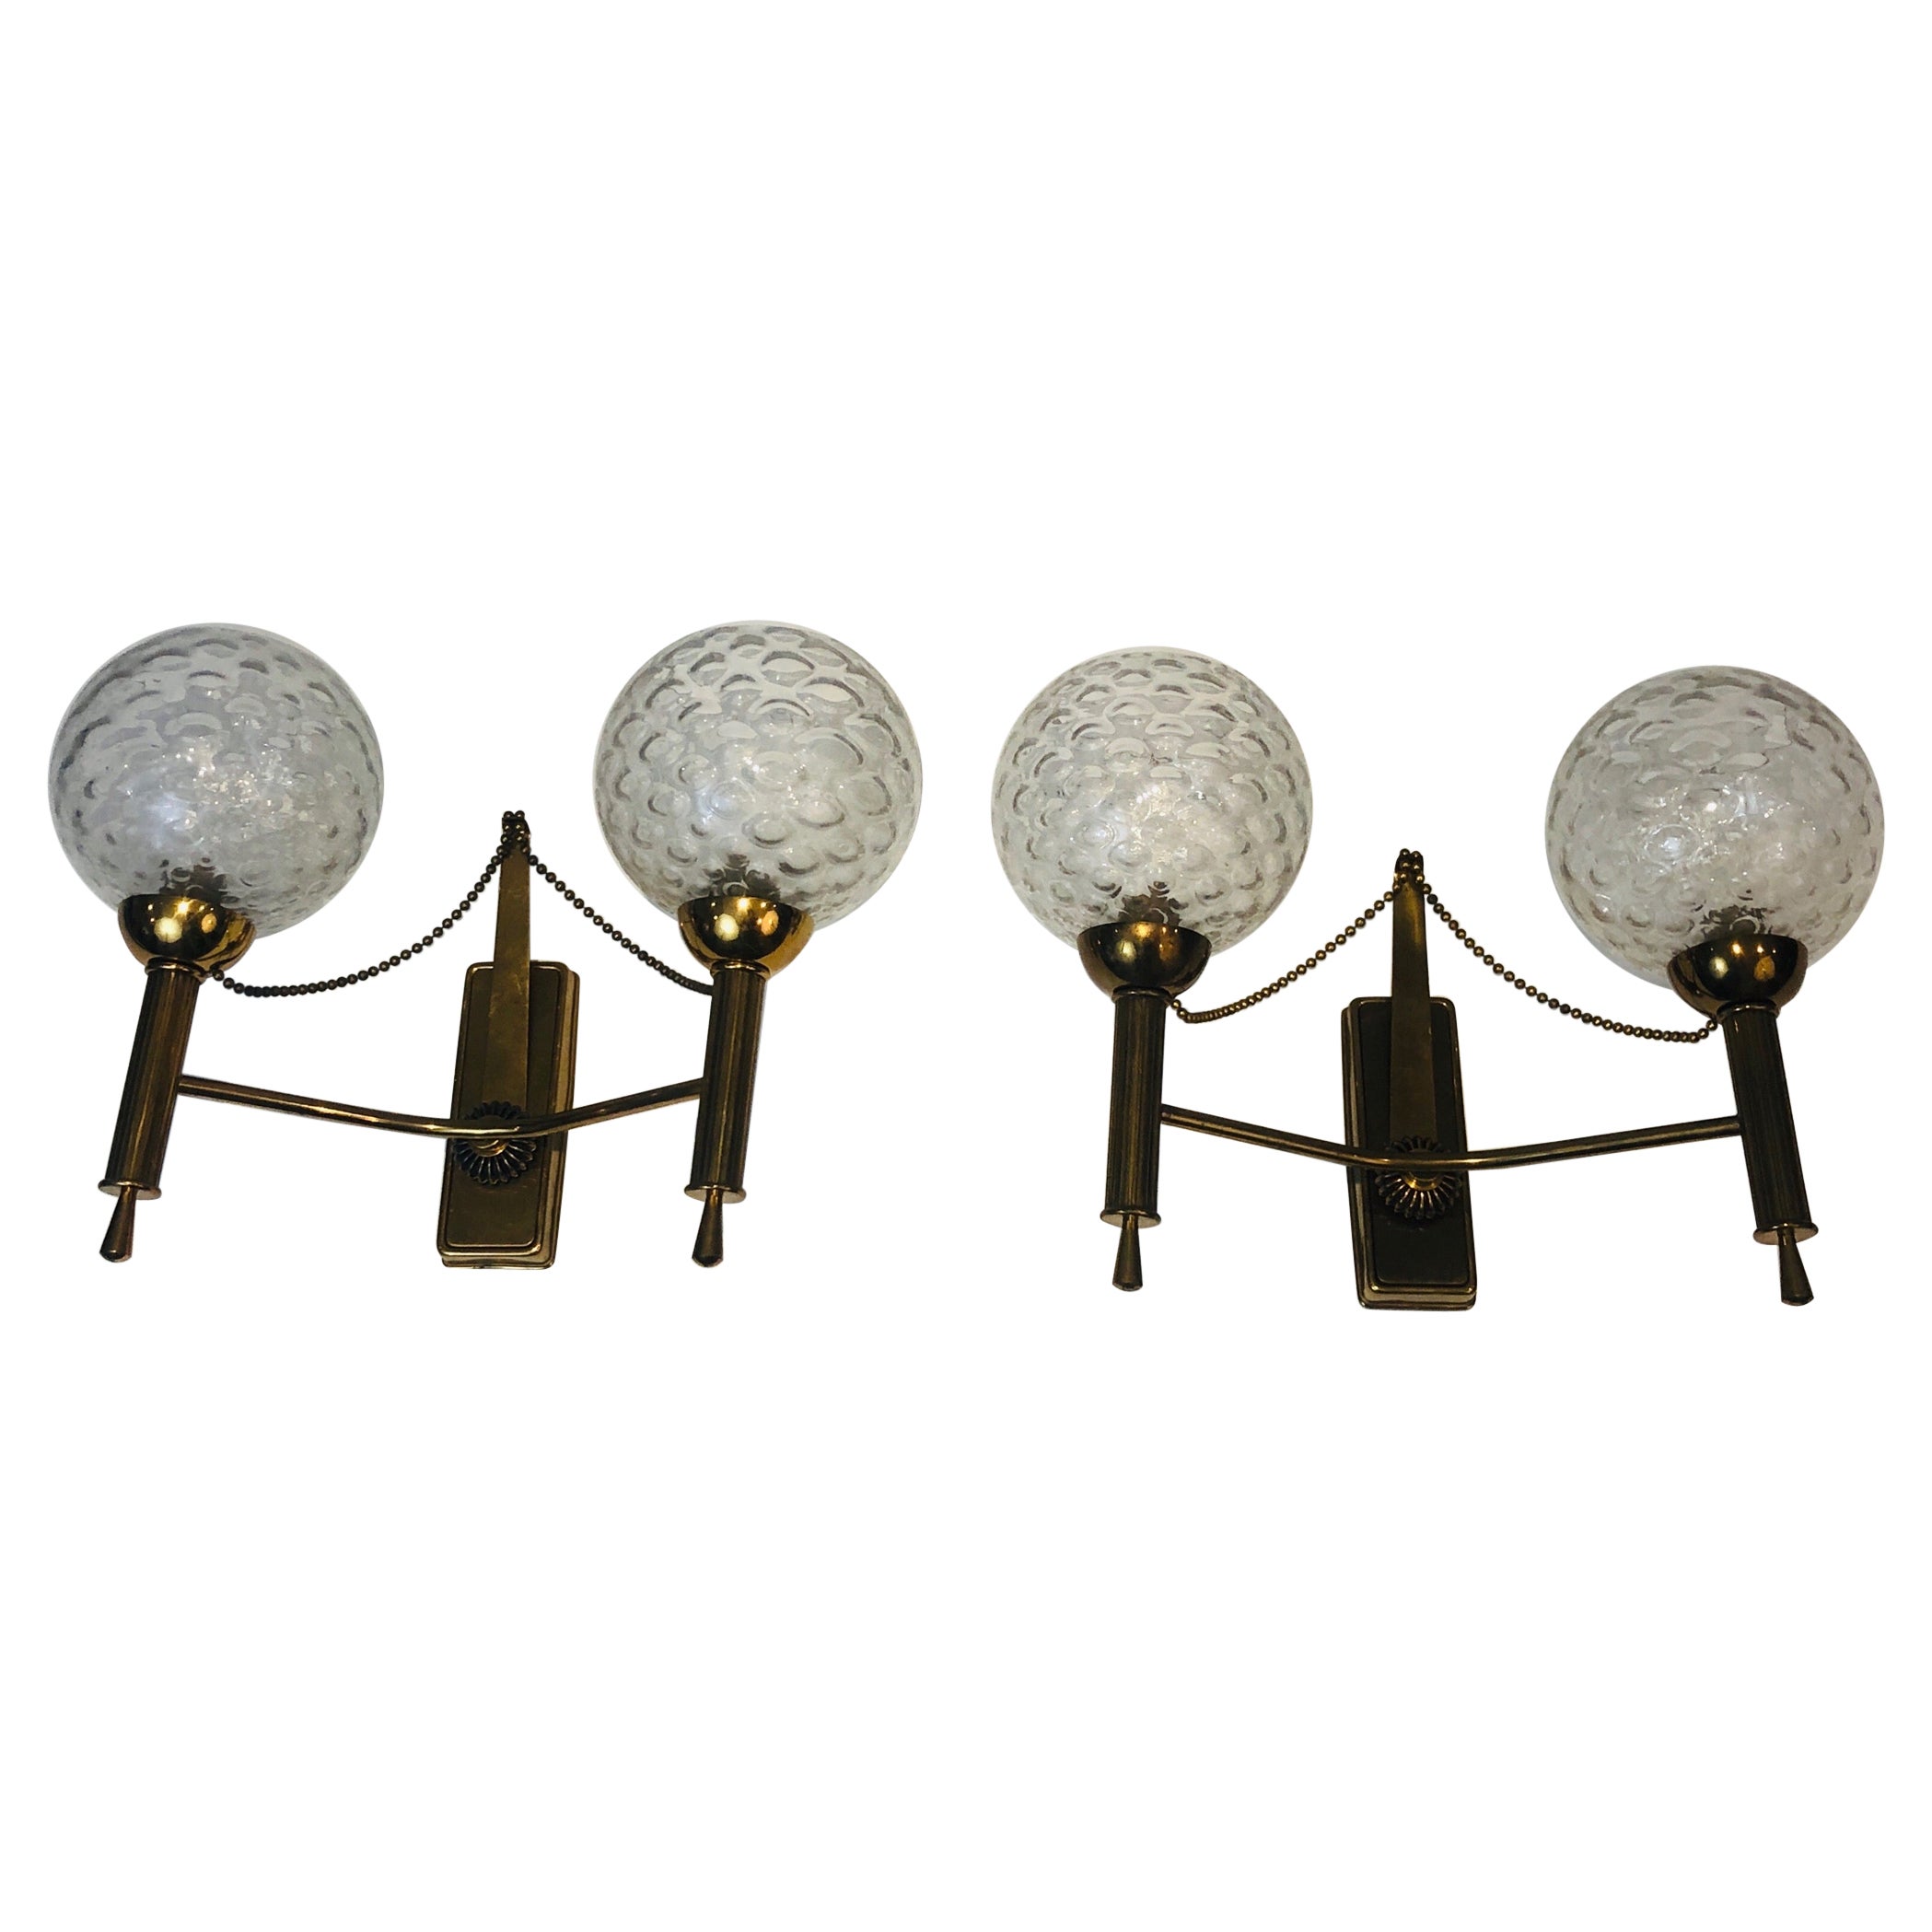 Pair of Brass and Glass Bowls Wall Sconces, French Work, Circa 1970 For Sale